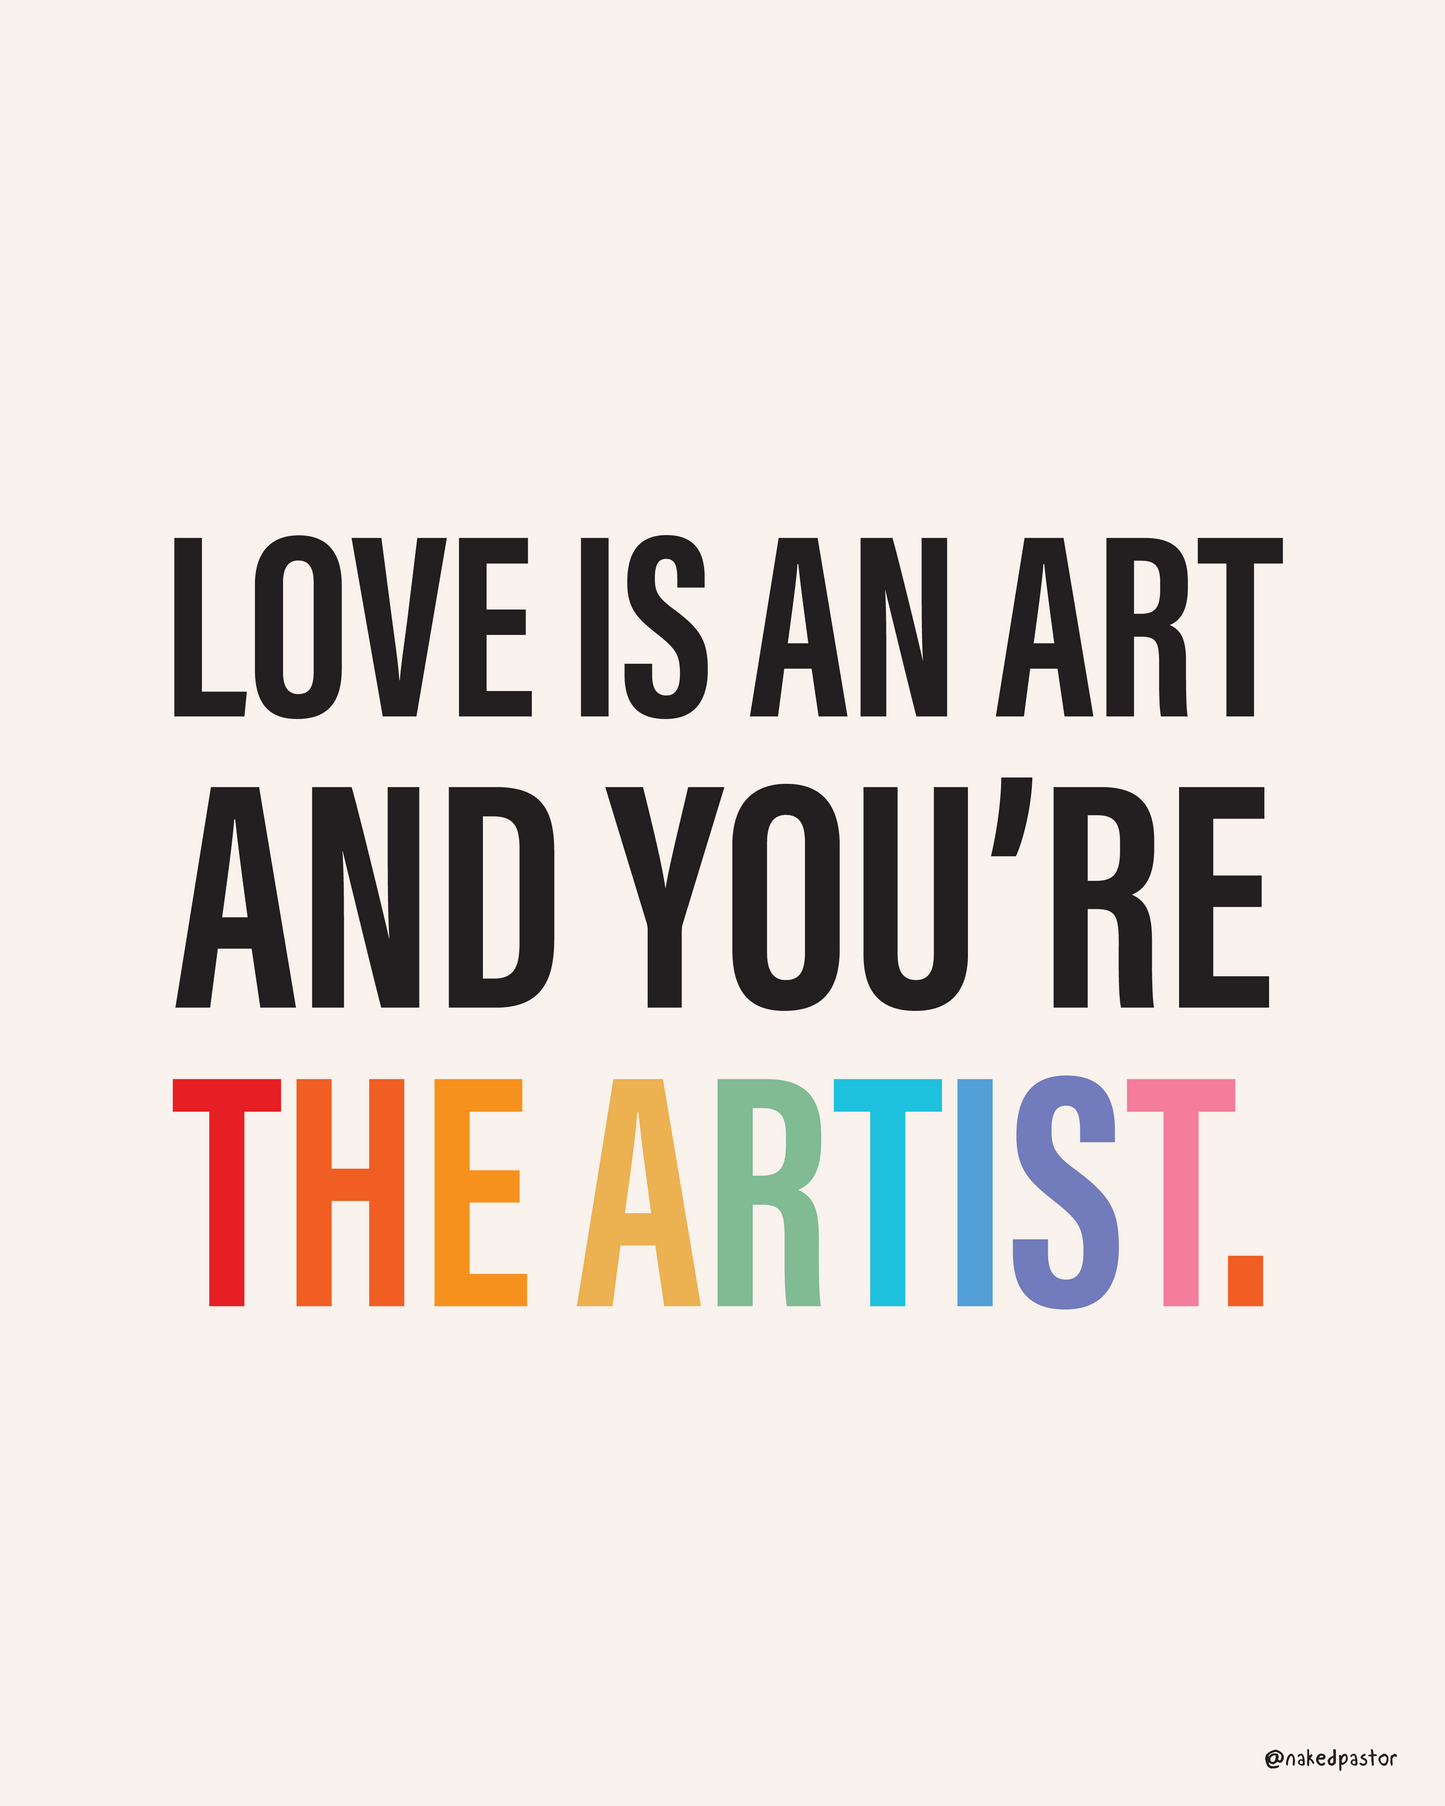 Love Is An Art and You're The Artist